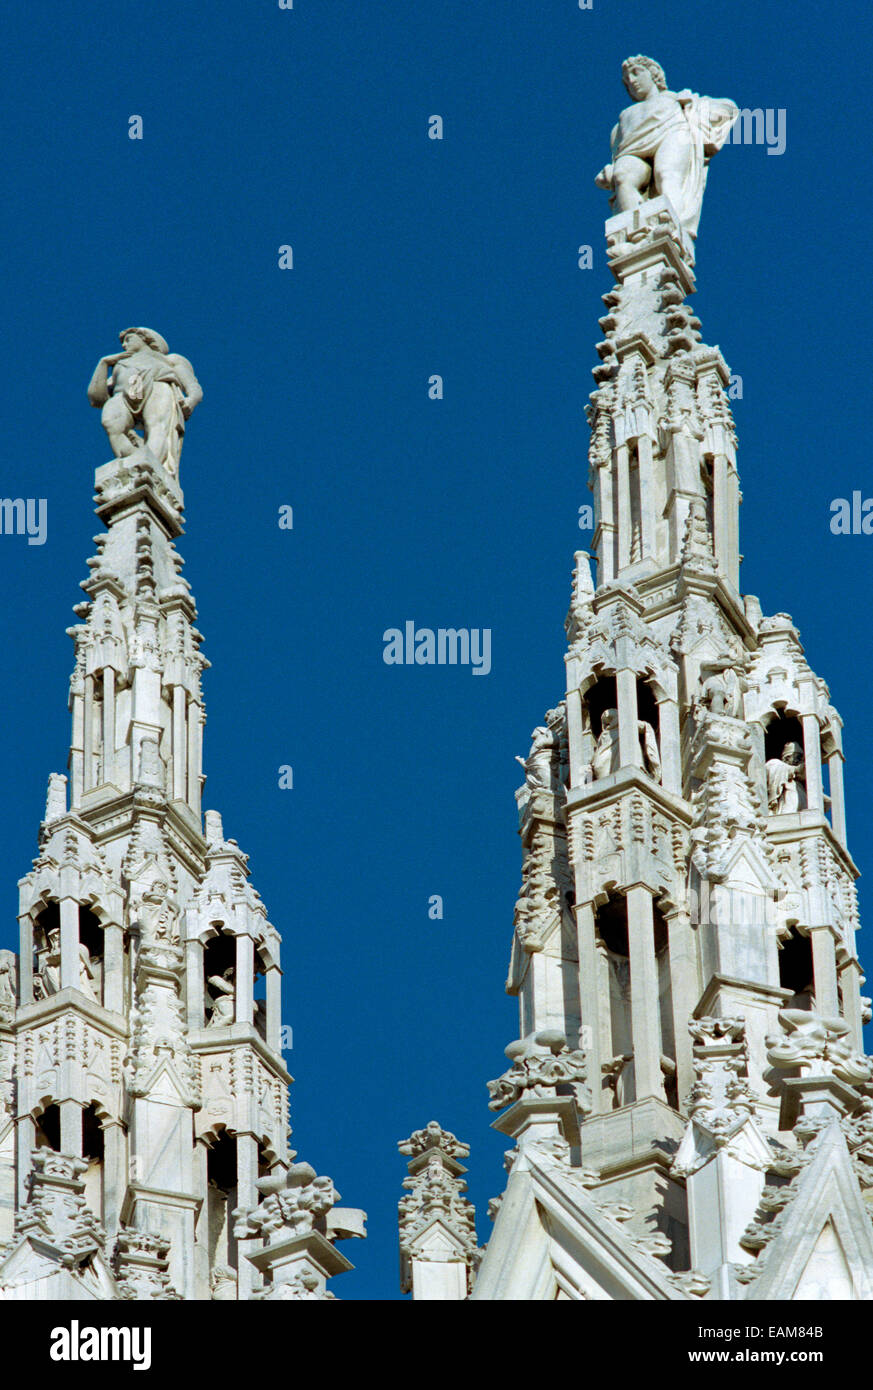 Italy, Lombardy, Milan, Roof of the Duomo Cathedral, Spire Stock Photo